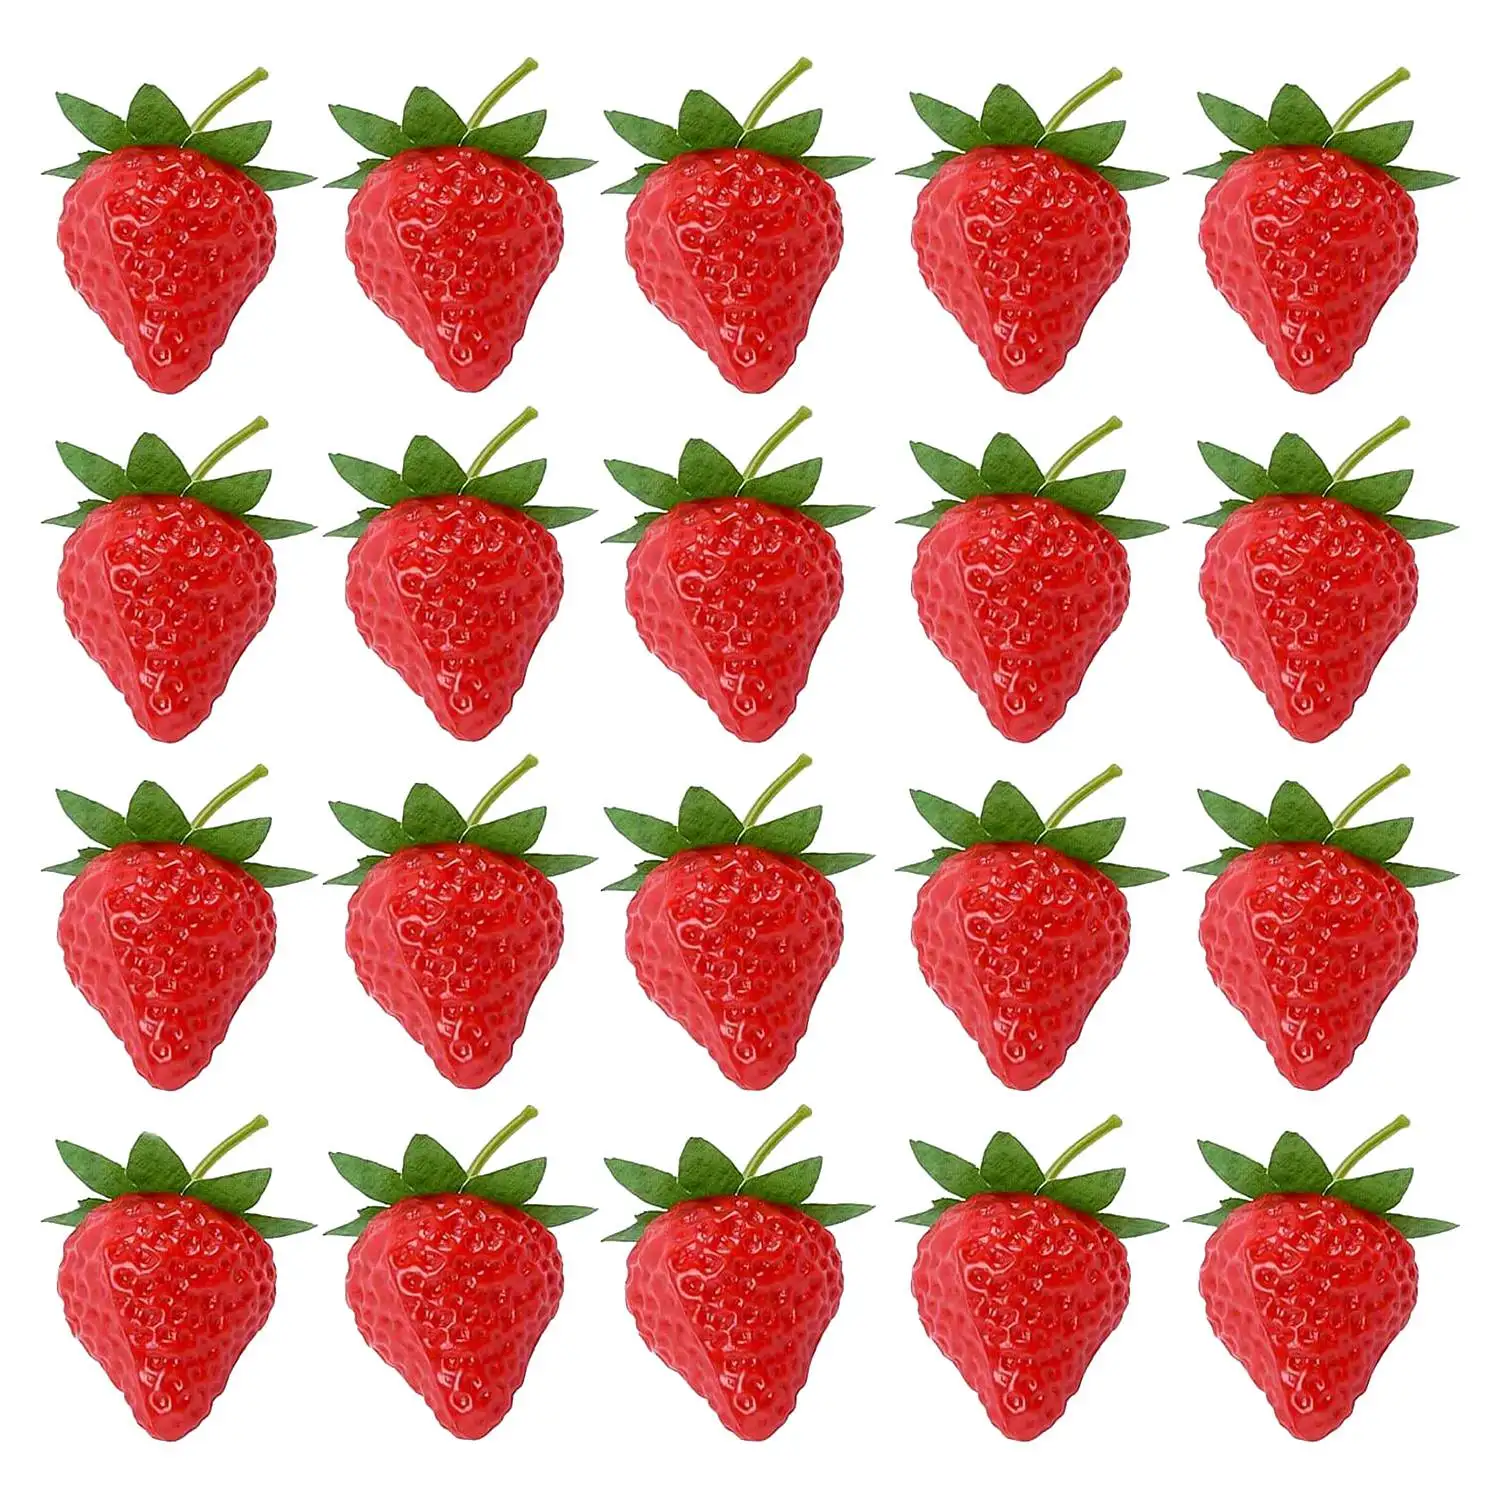 

20 Pieces Artificial Strawberry Fake Fruit Strawberries Photography Prop Home Kitchen Cabinet Party Ornament Small